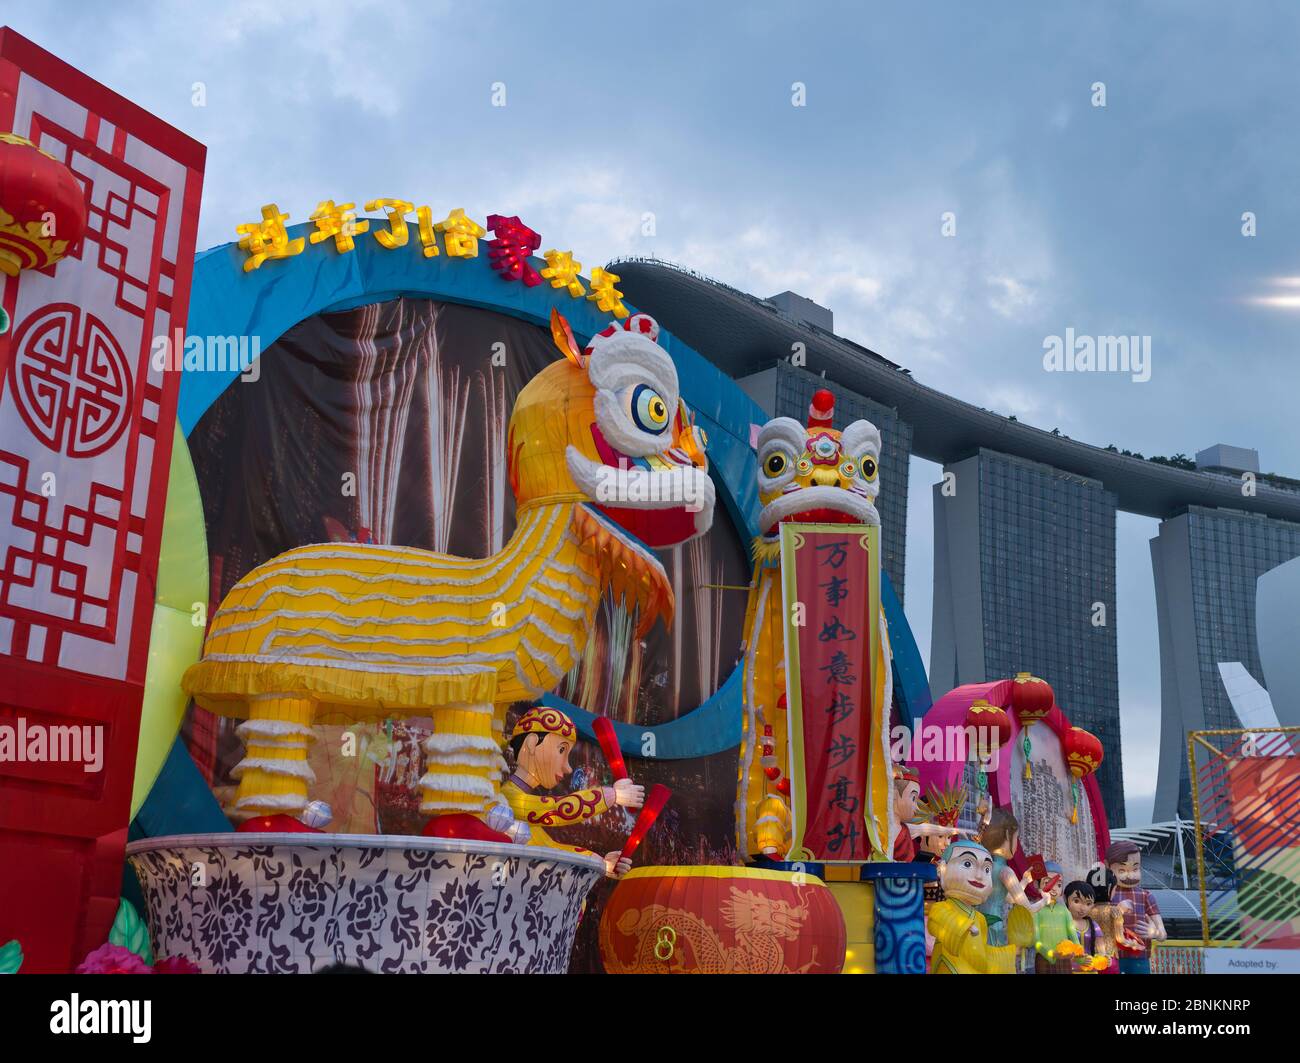 dh Chinese New Year MARINA BAY SINGAPORE Lion dance Statues decorations display Stock Photo